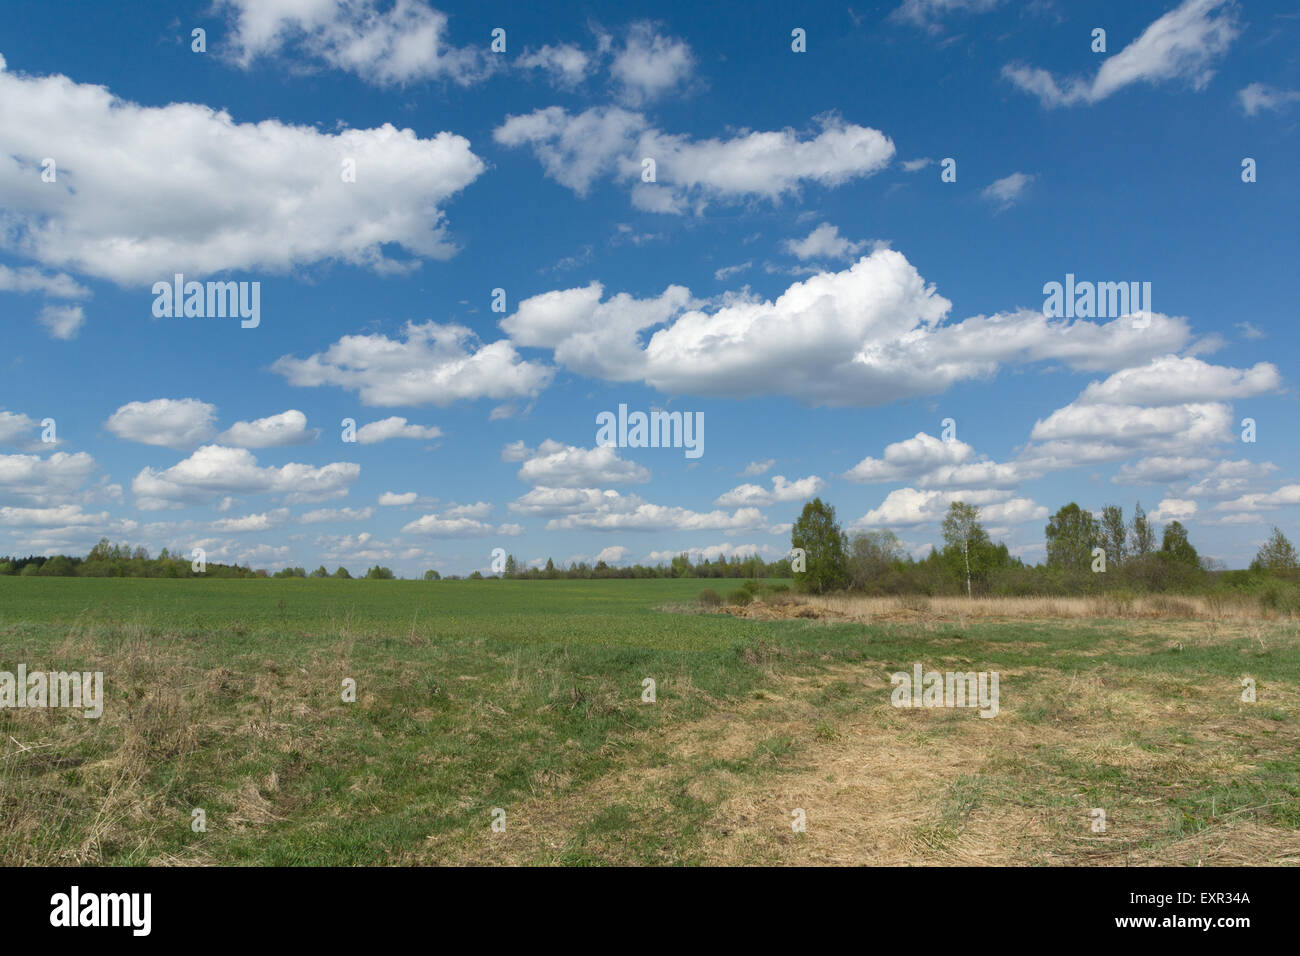 beautiful rural landscape with green vegetation and the bright sky Stock Photo